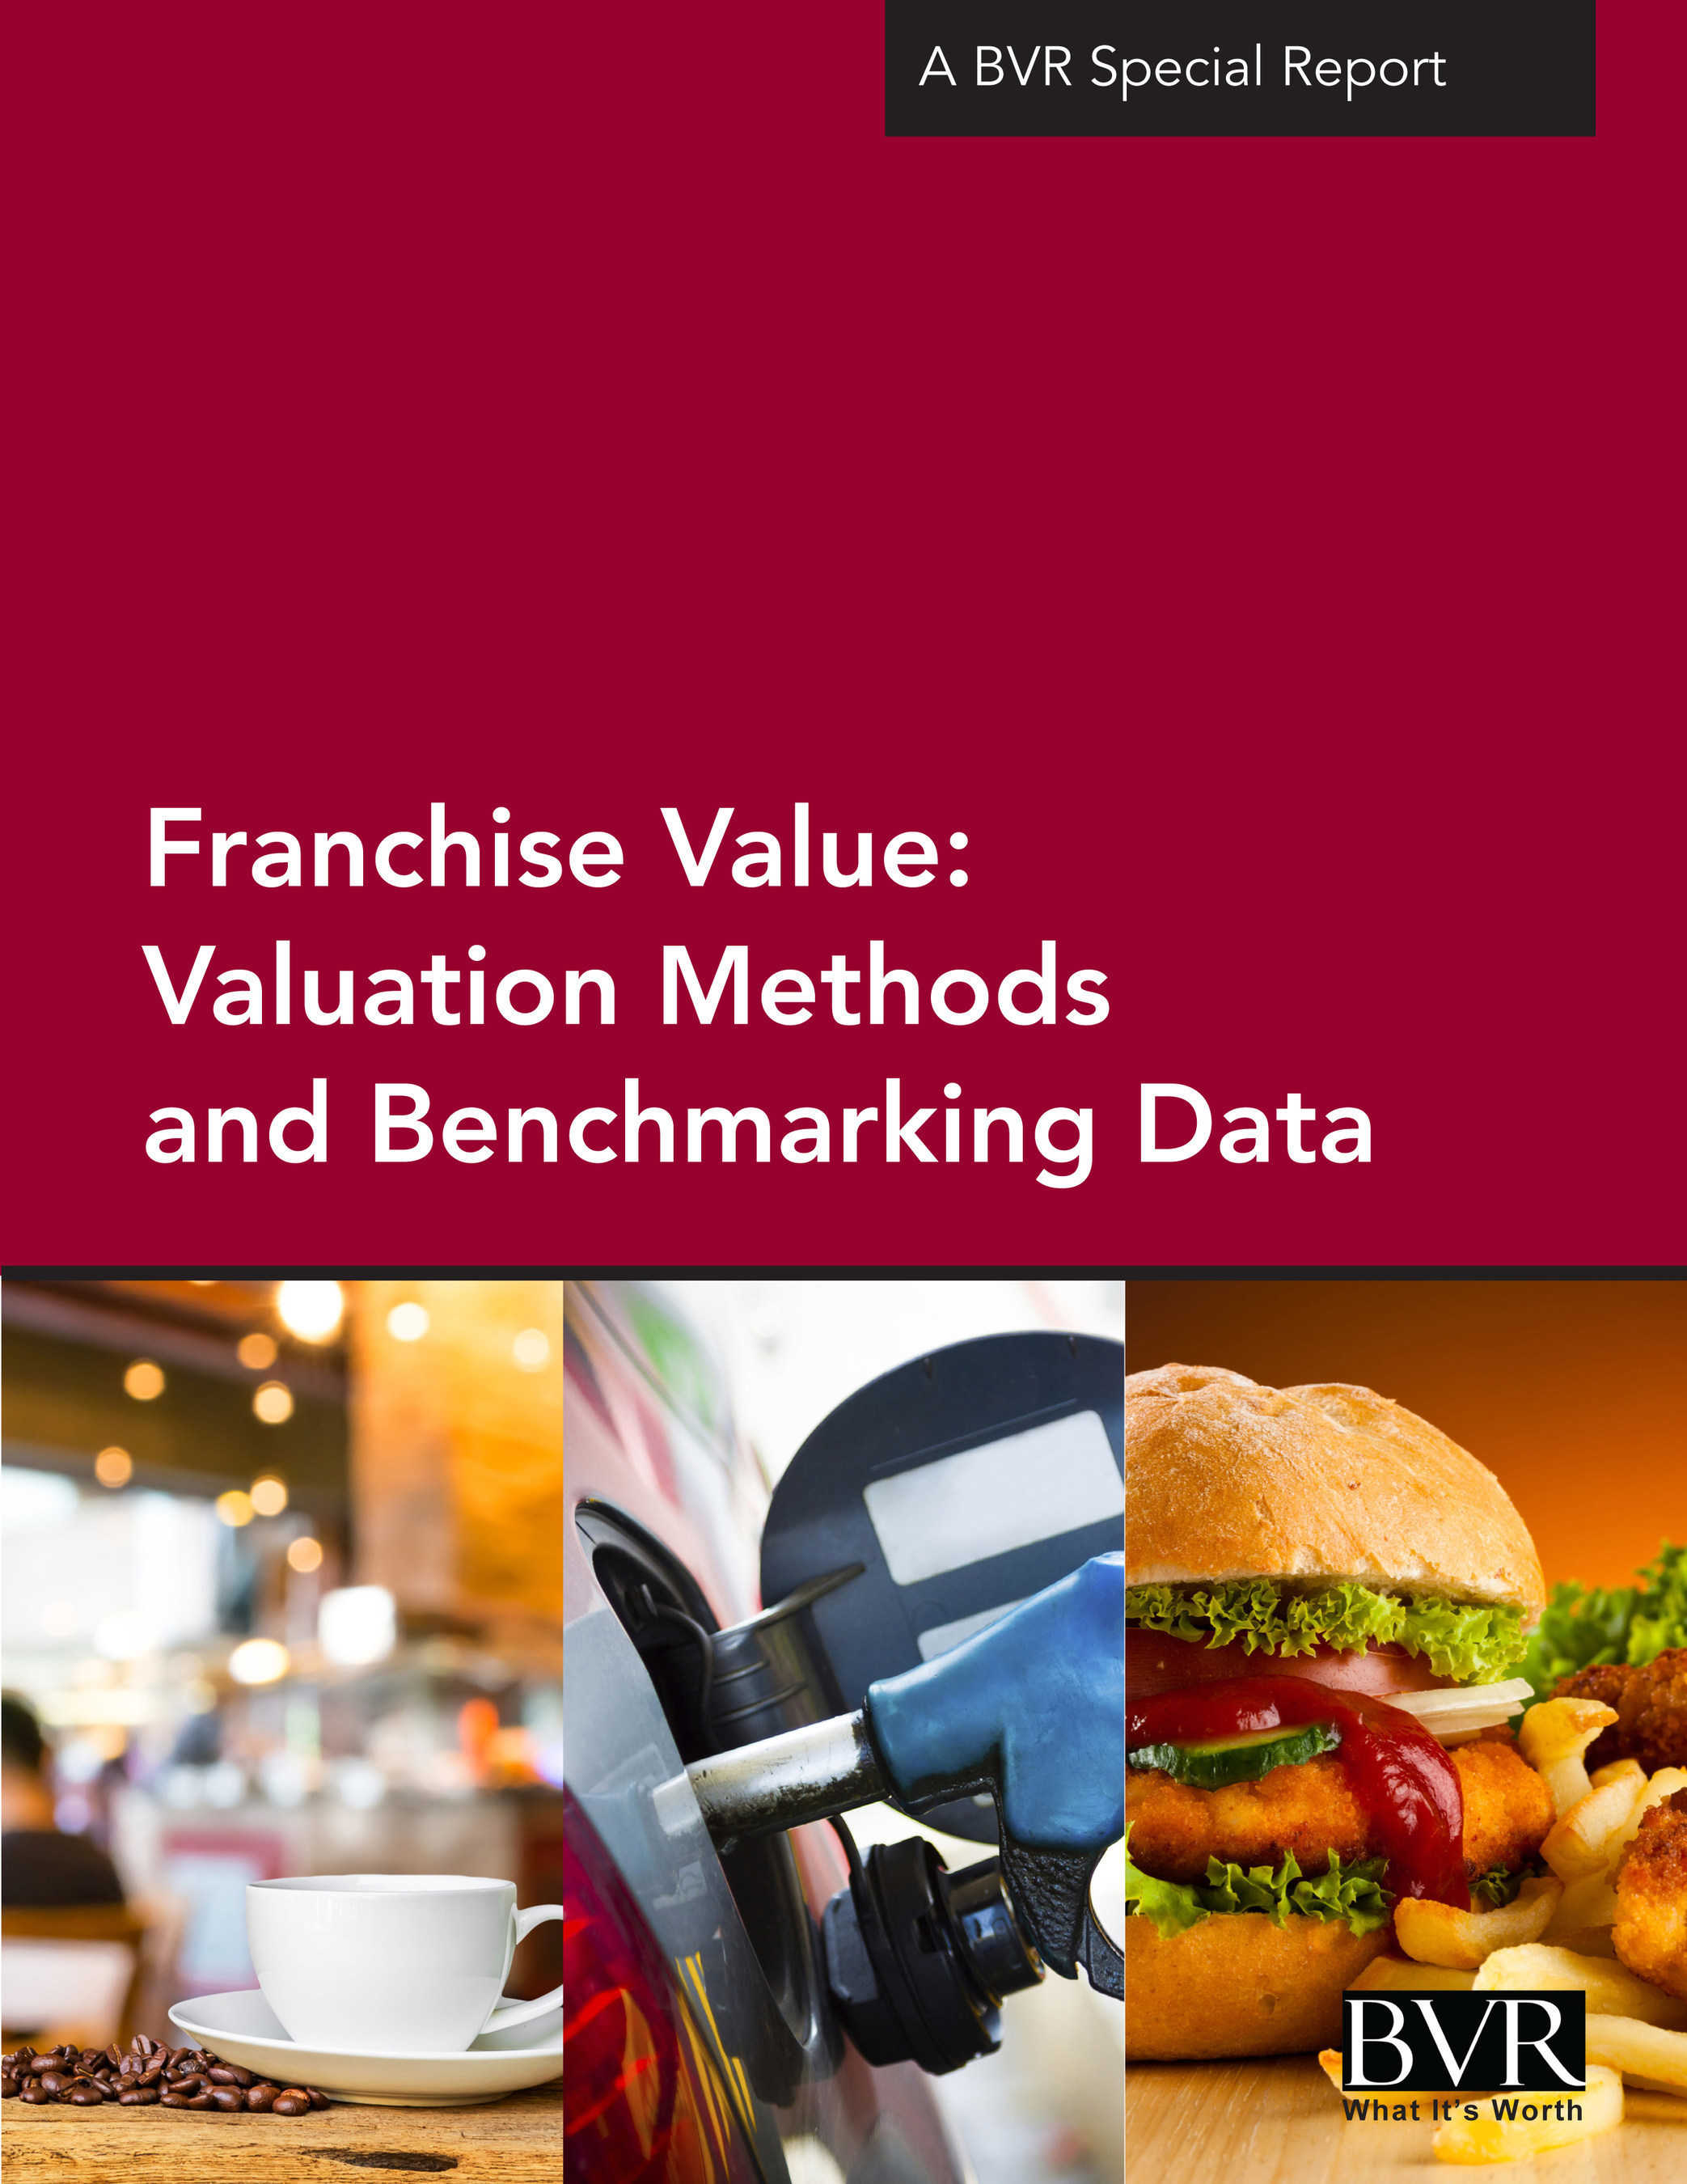 New special report on franchise value tackles the myriad of valuation challenges across all industries.